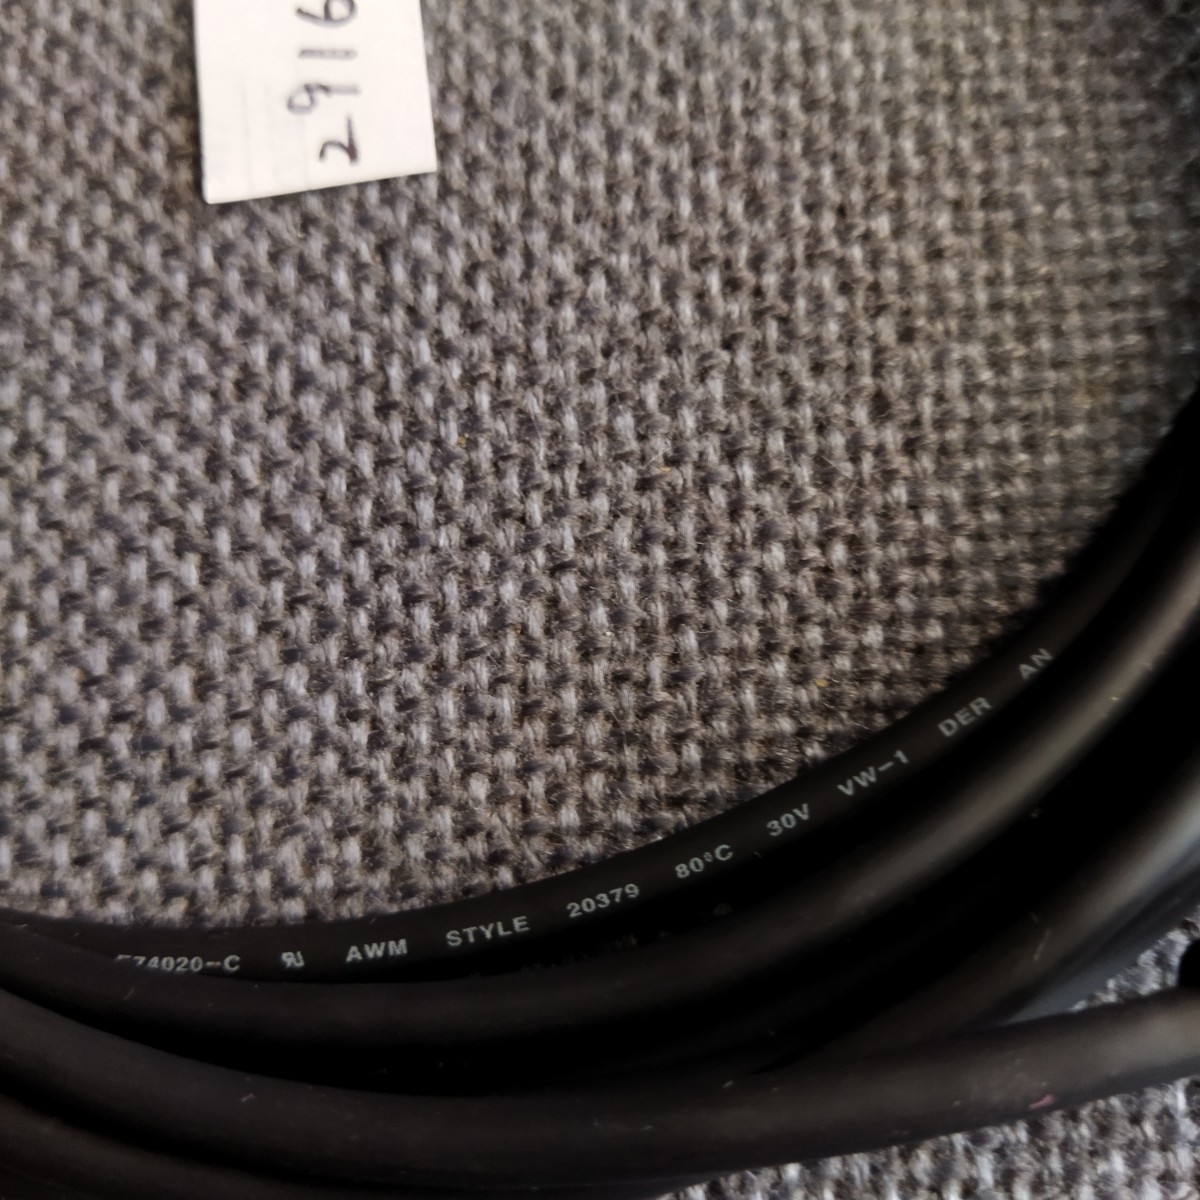 FIREWIRE 800-400 cable approximately 4 meter control number 2916